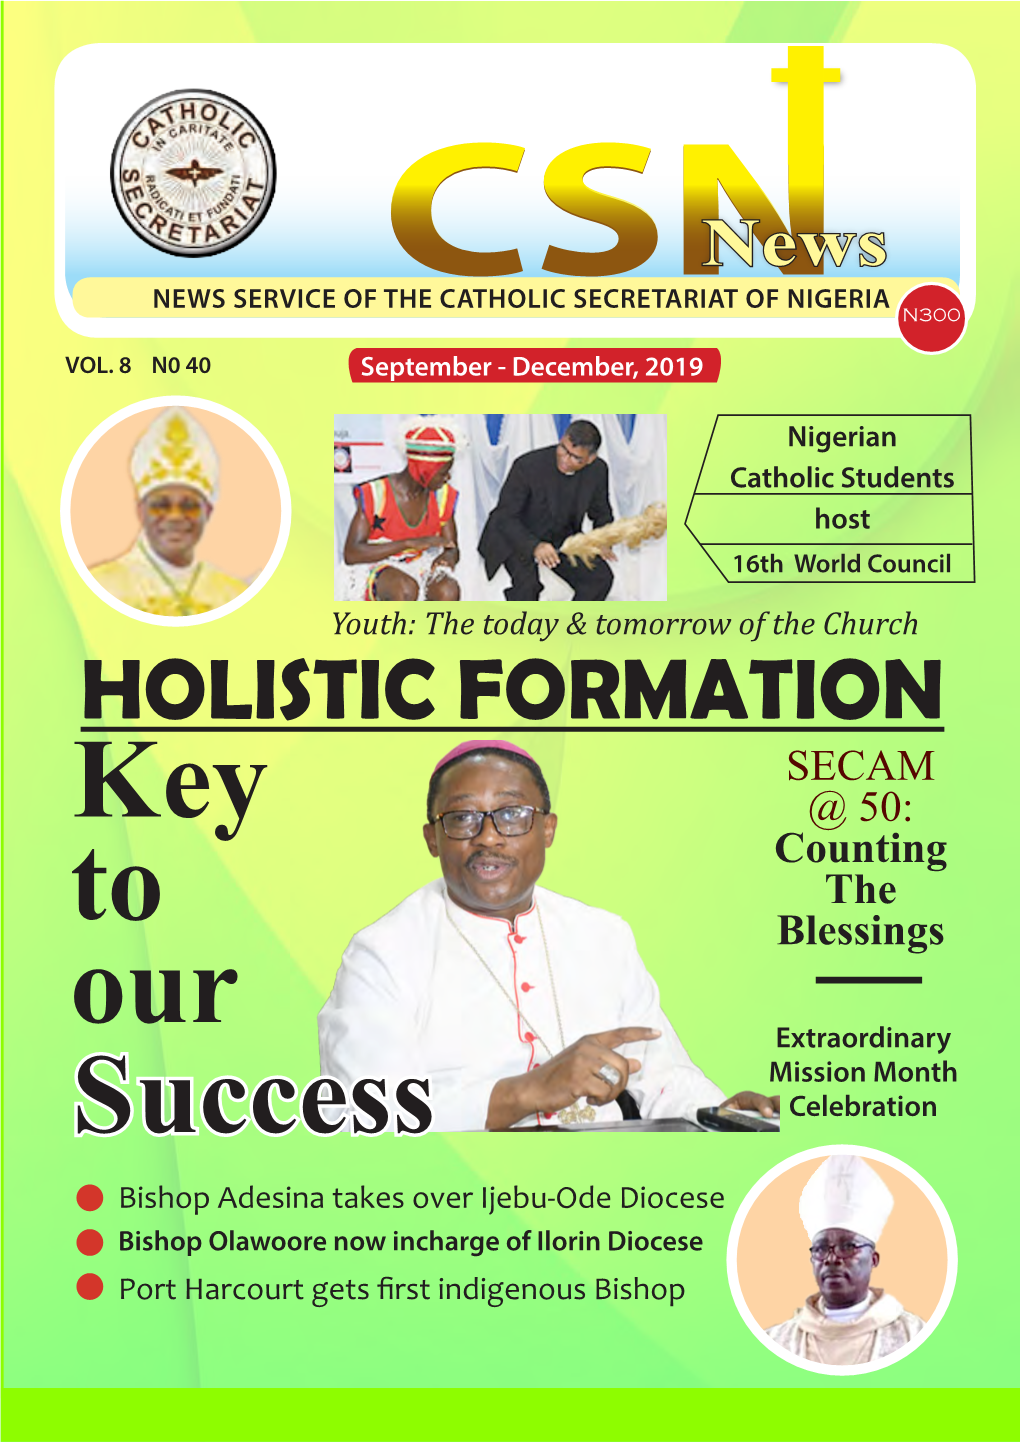 KEY to OUR SUCCESS STORY Christian Denominations in the Area